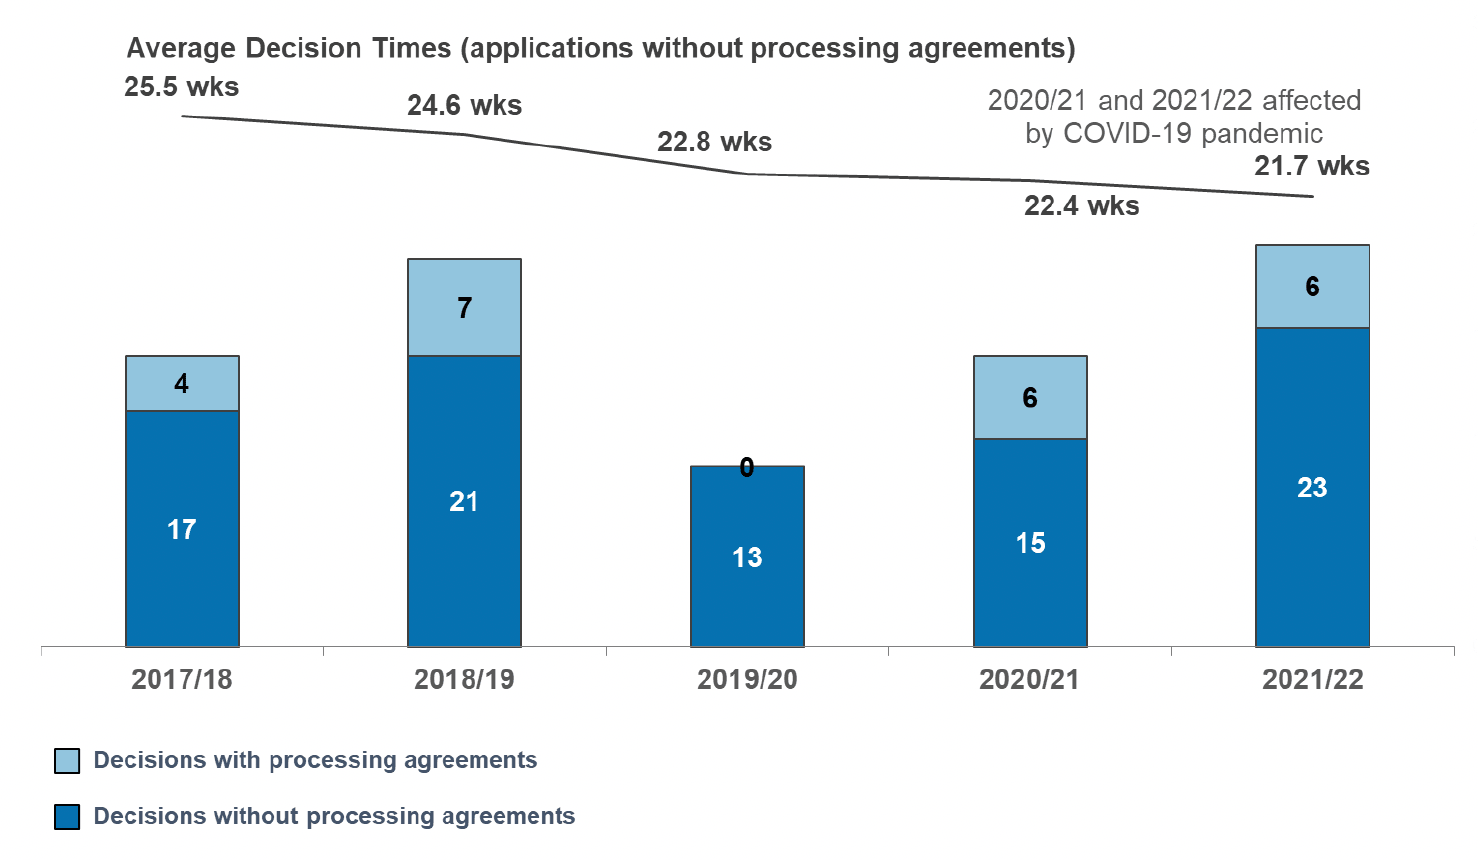 A stacked column chart showing number of major business and industry applications decided since 2017/18. Also a line chart of average decision times for major business and industry applications without processing agreements. Numbers of applications vary, but 2021/22 has the largest number in this time period (29). Average decision times have been gradually falling since 2017/18 to 21.7 weeks in 2021/22.